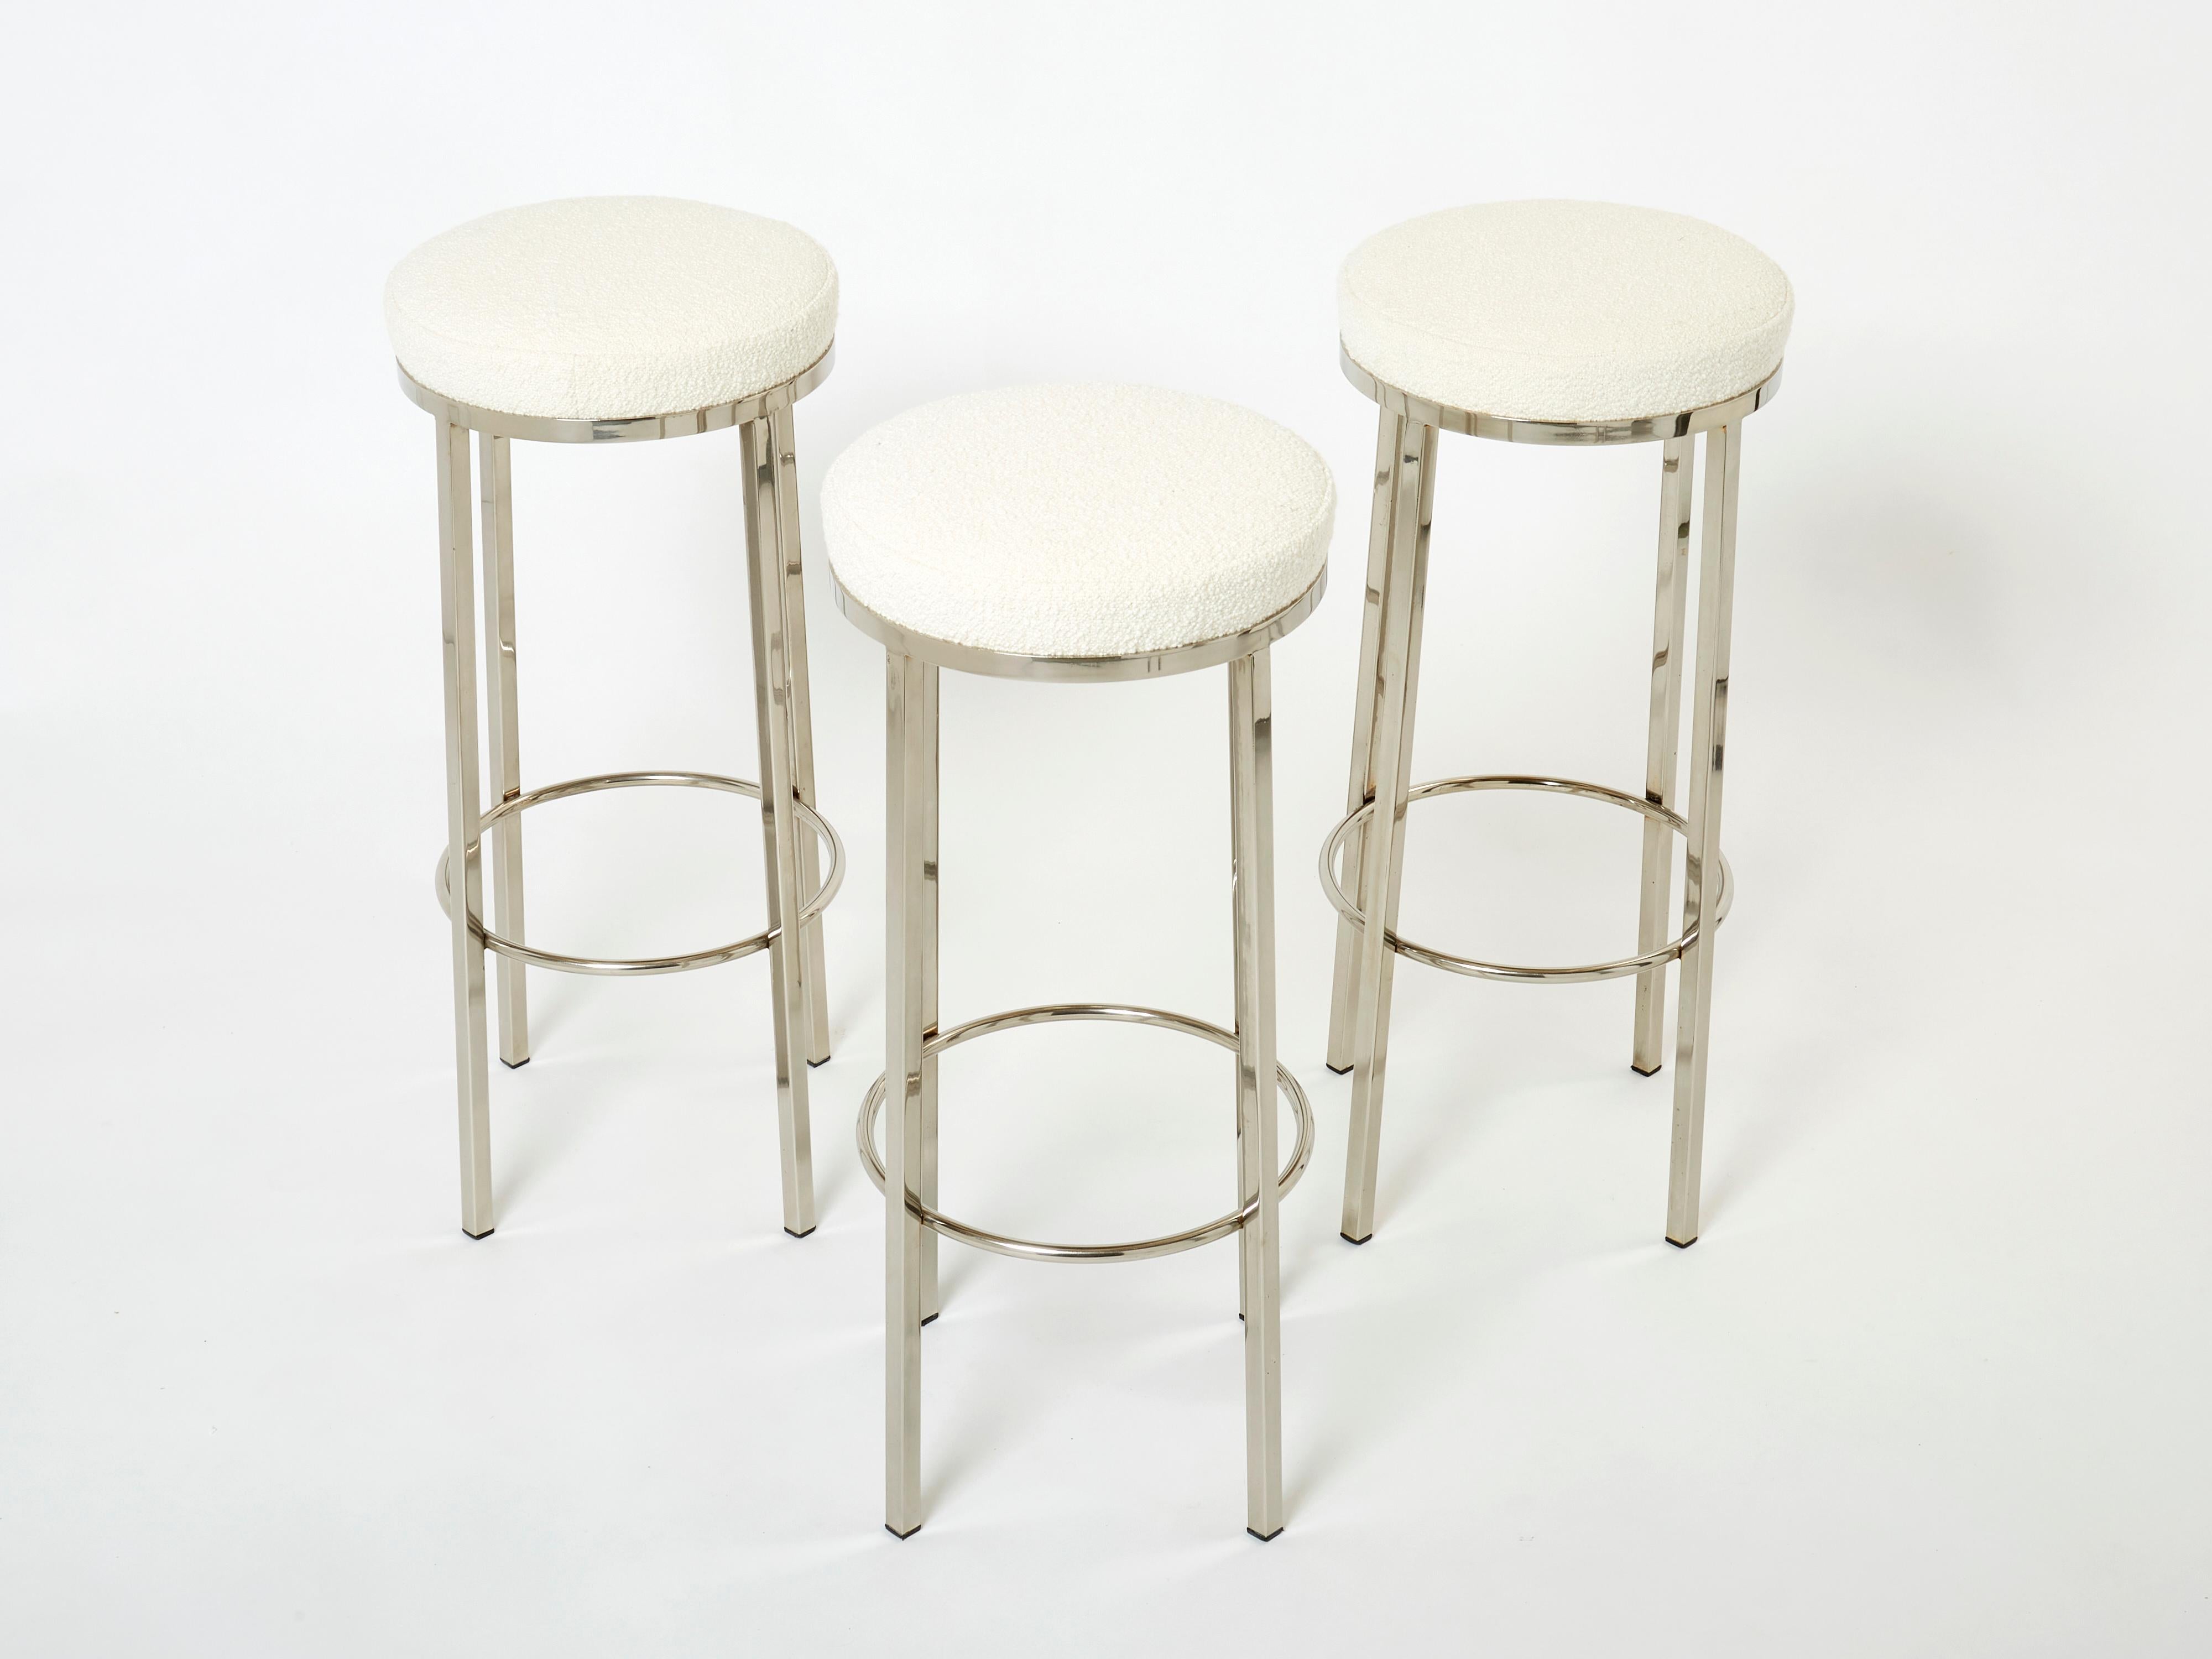 Simple lines point to these beautiful bar stools french mid-century roots. Designed by Jean Claude Mahey for Romeo Paris in the seventies, it features smooth brushed steel legs, newly upholstered with a soft wool bouclé fabric by Lelièvre. Its